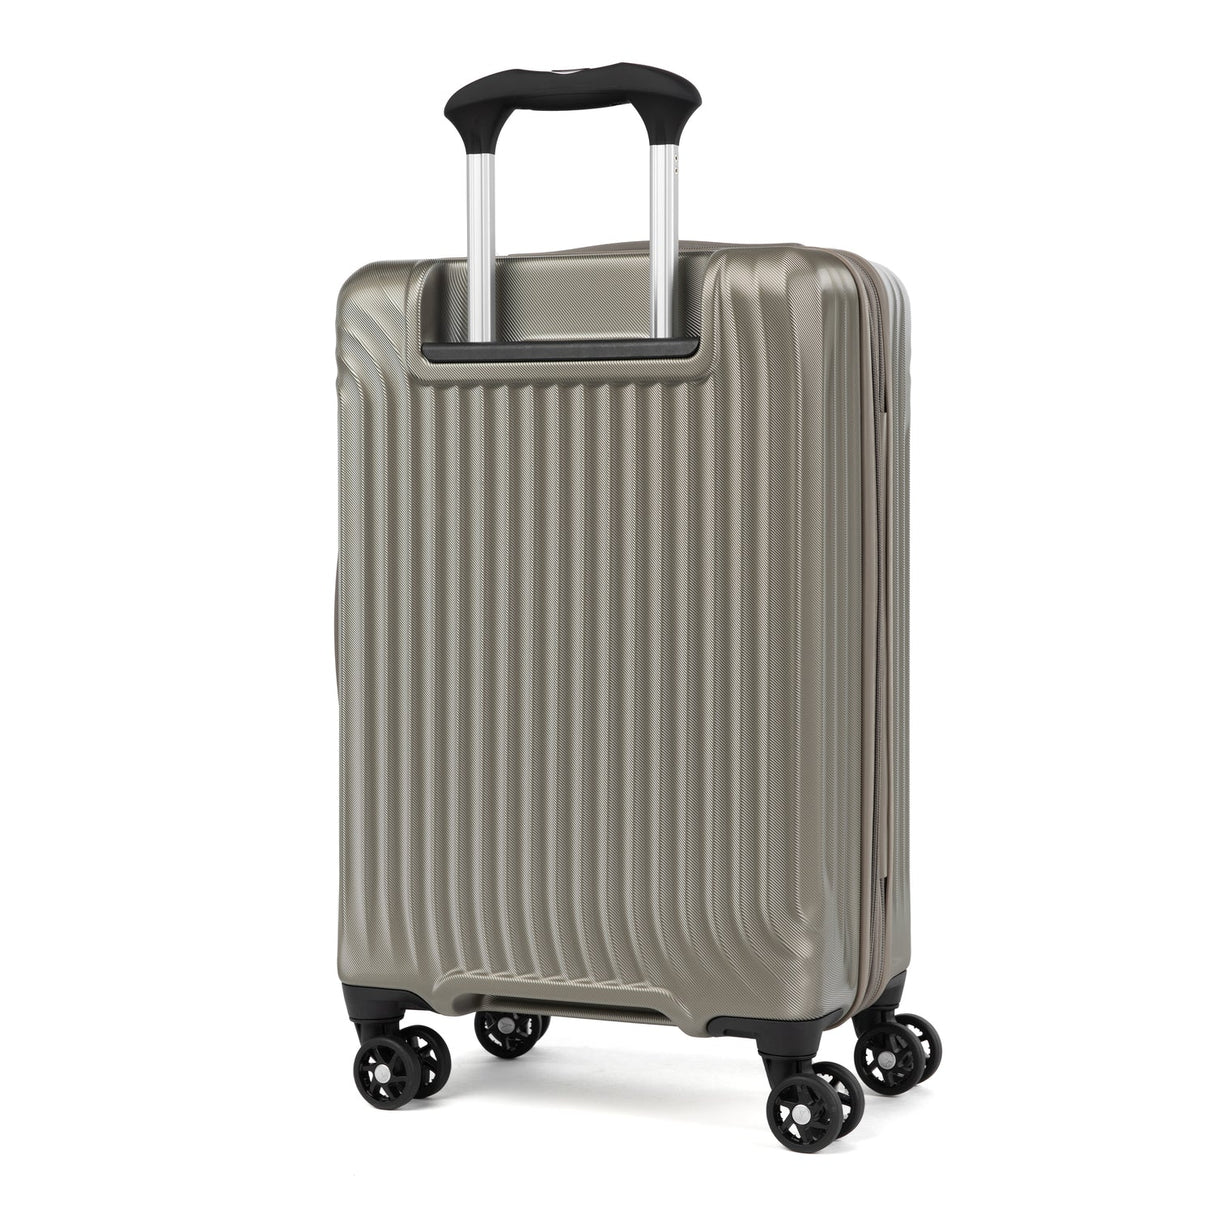 Travelpro Maxlite Air Carry-On Expandable Hardside Spinner , , 401229135_back-1500x1500-d707c29_1024x1024_2x_1d0a9e3b-ccd8-463e-ae93-ad29ab91ce99